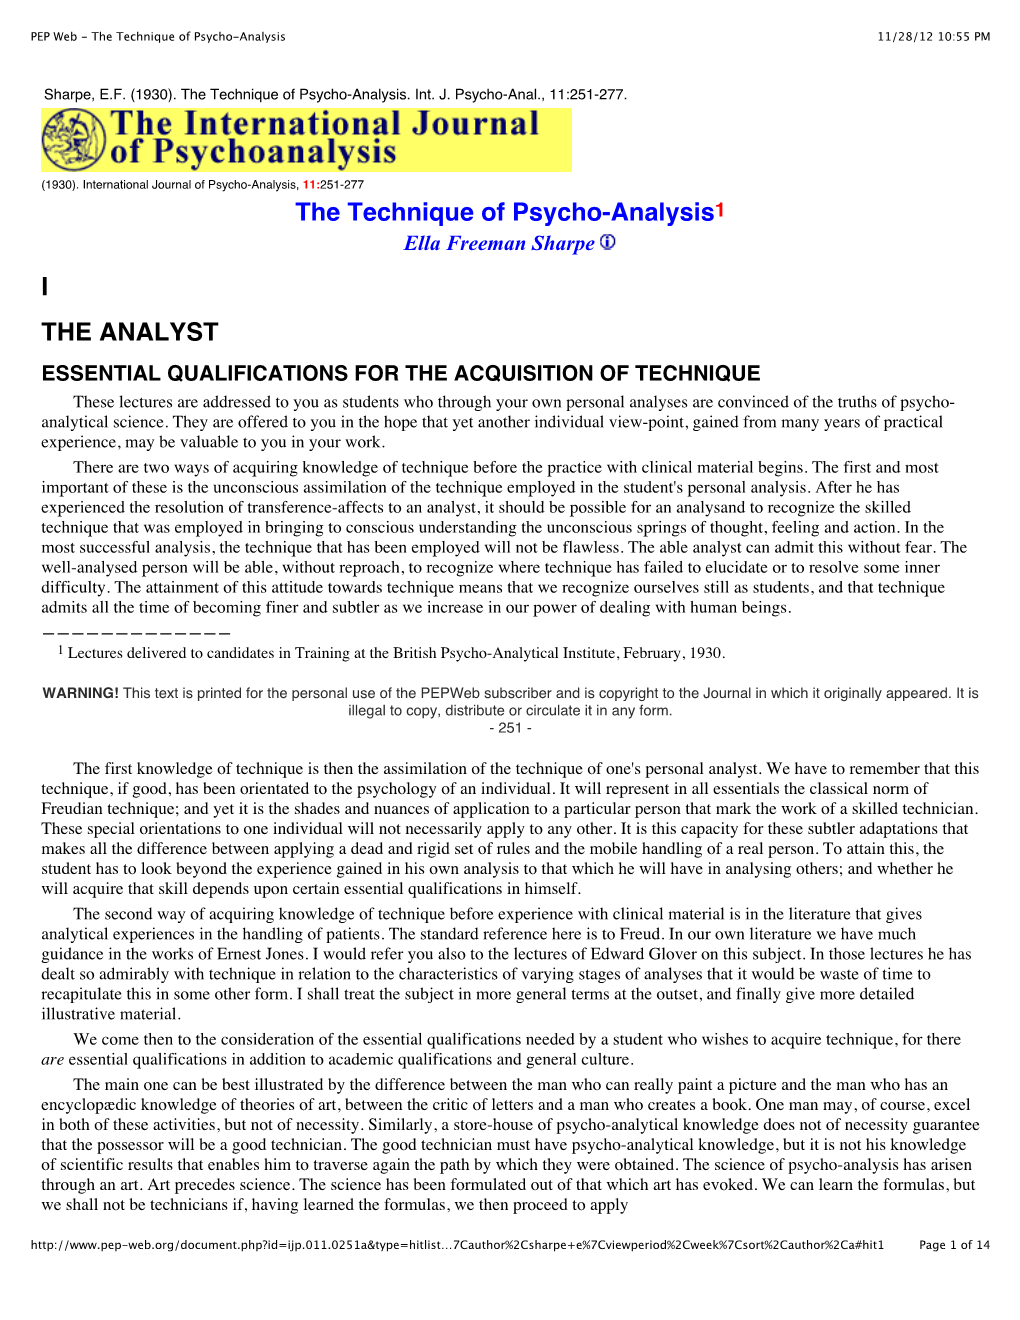 The Technique of Psycho-Analysis 11/28/12 10:55 PM